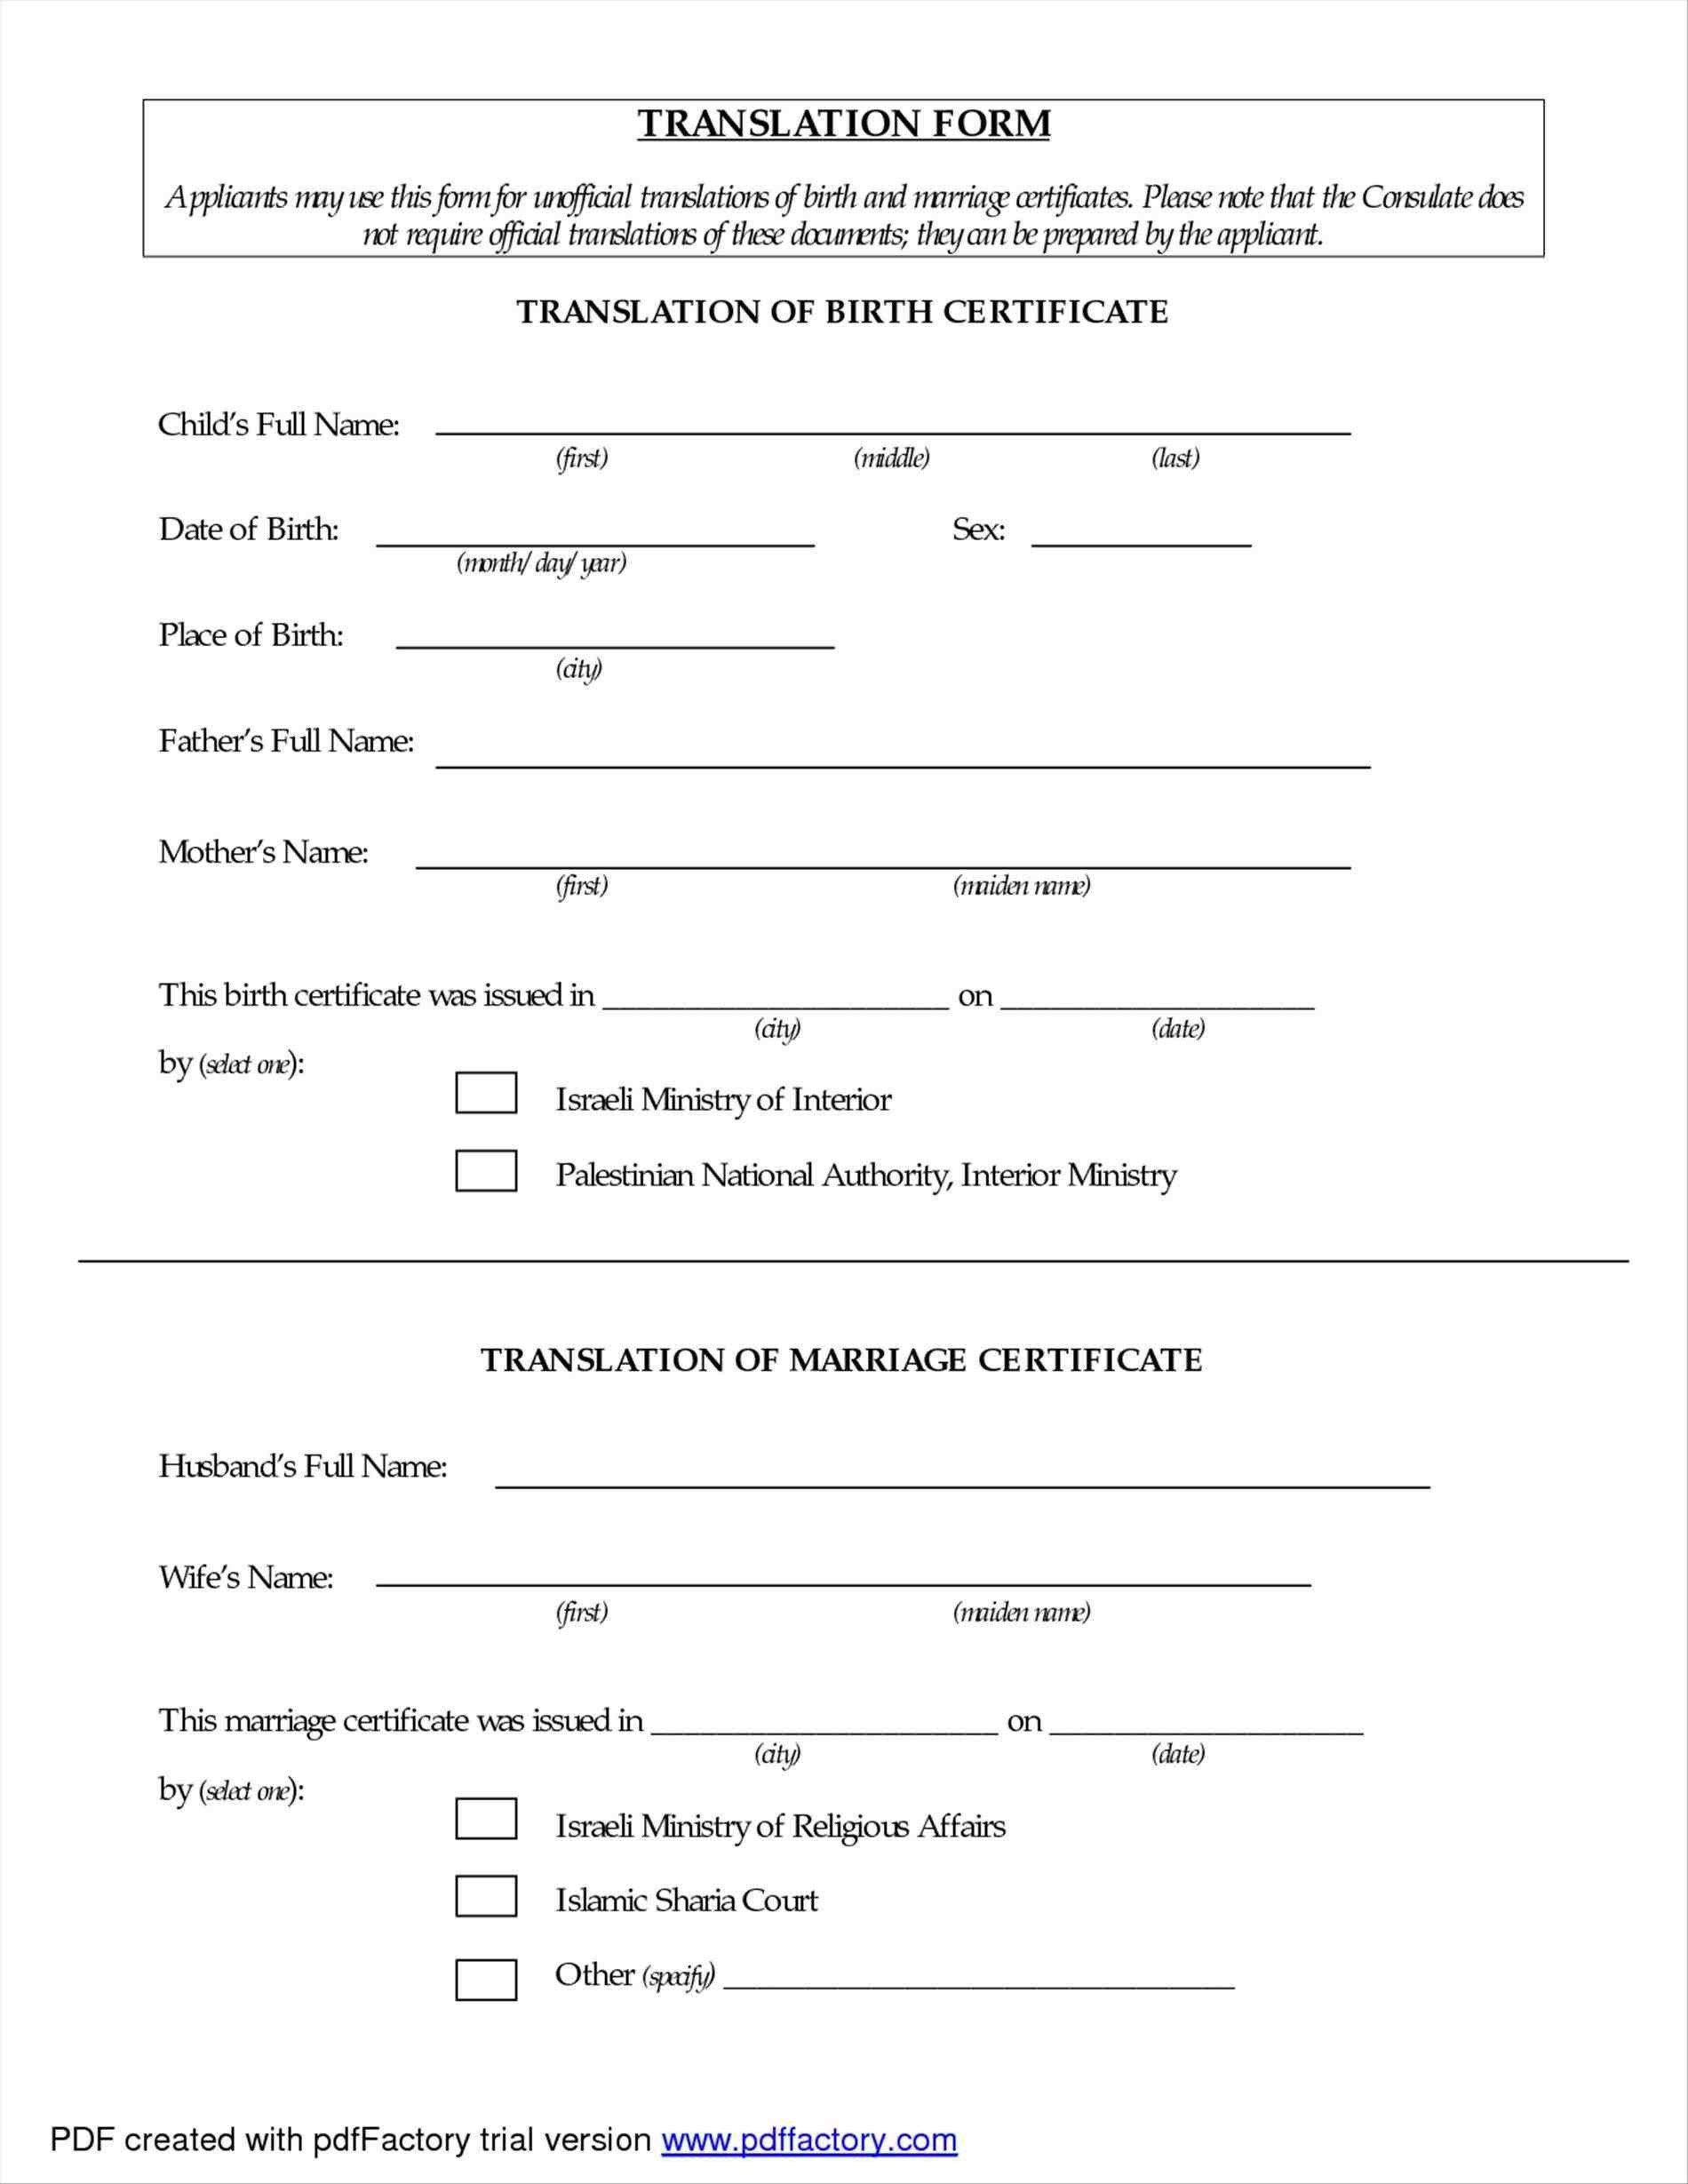 Translate Marriage Certificate From Spanish To English With Spanish To English Birth Certificate Translation Template